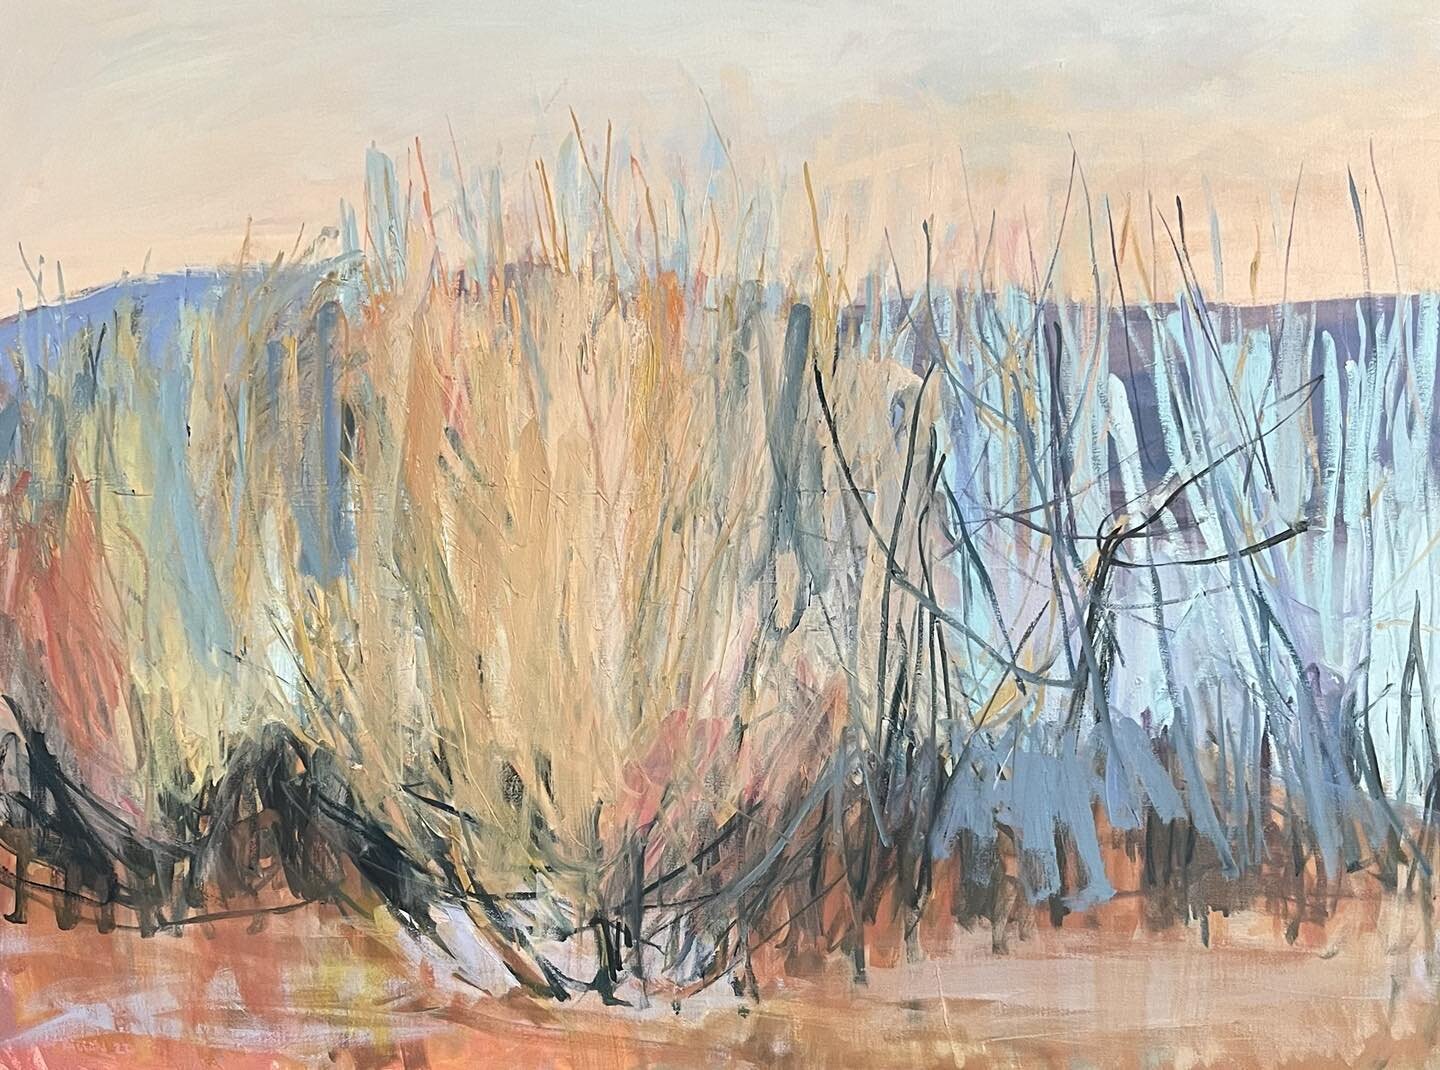 &ldquo;Island Willow&rdquo; 76x102cm by Lisa Ballard.

Always delighted to be able to showcase some statement large works for Lisa!

Book now to view more of Lisa&rsquo;s oil paintings here in the lovely calm surroundings of battletown! 

@lisaballar